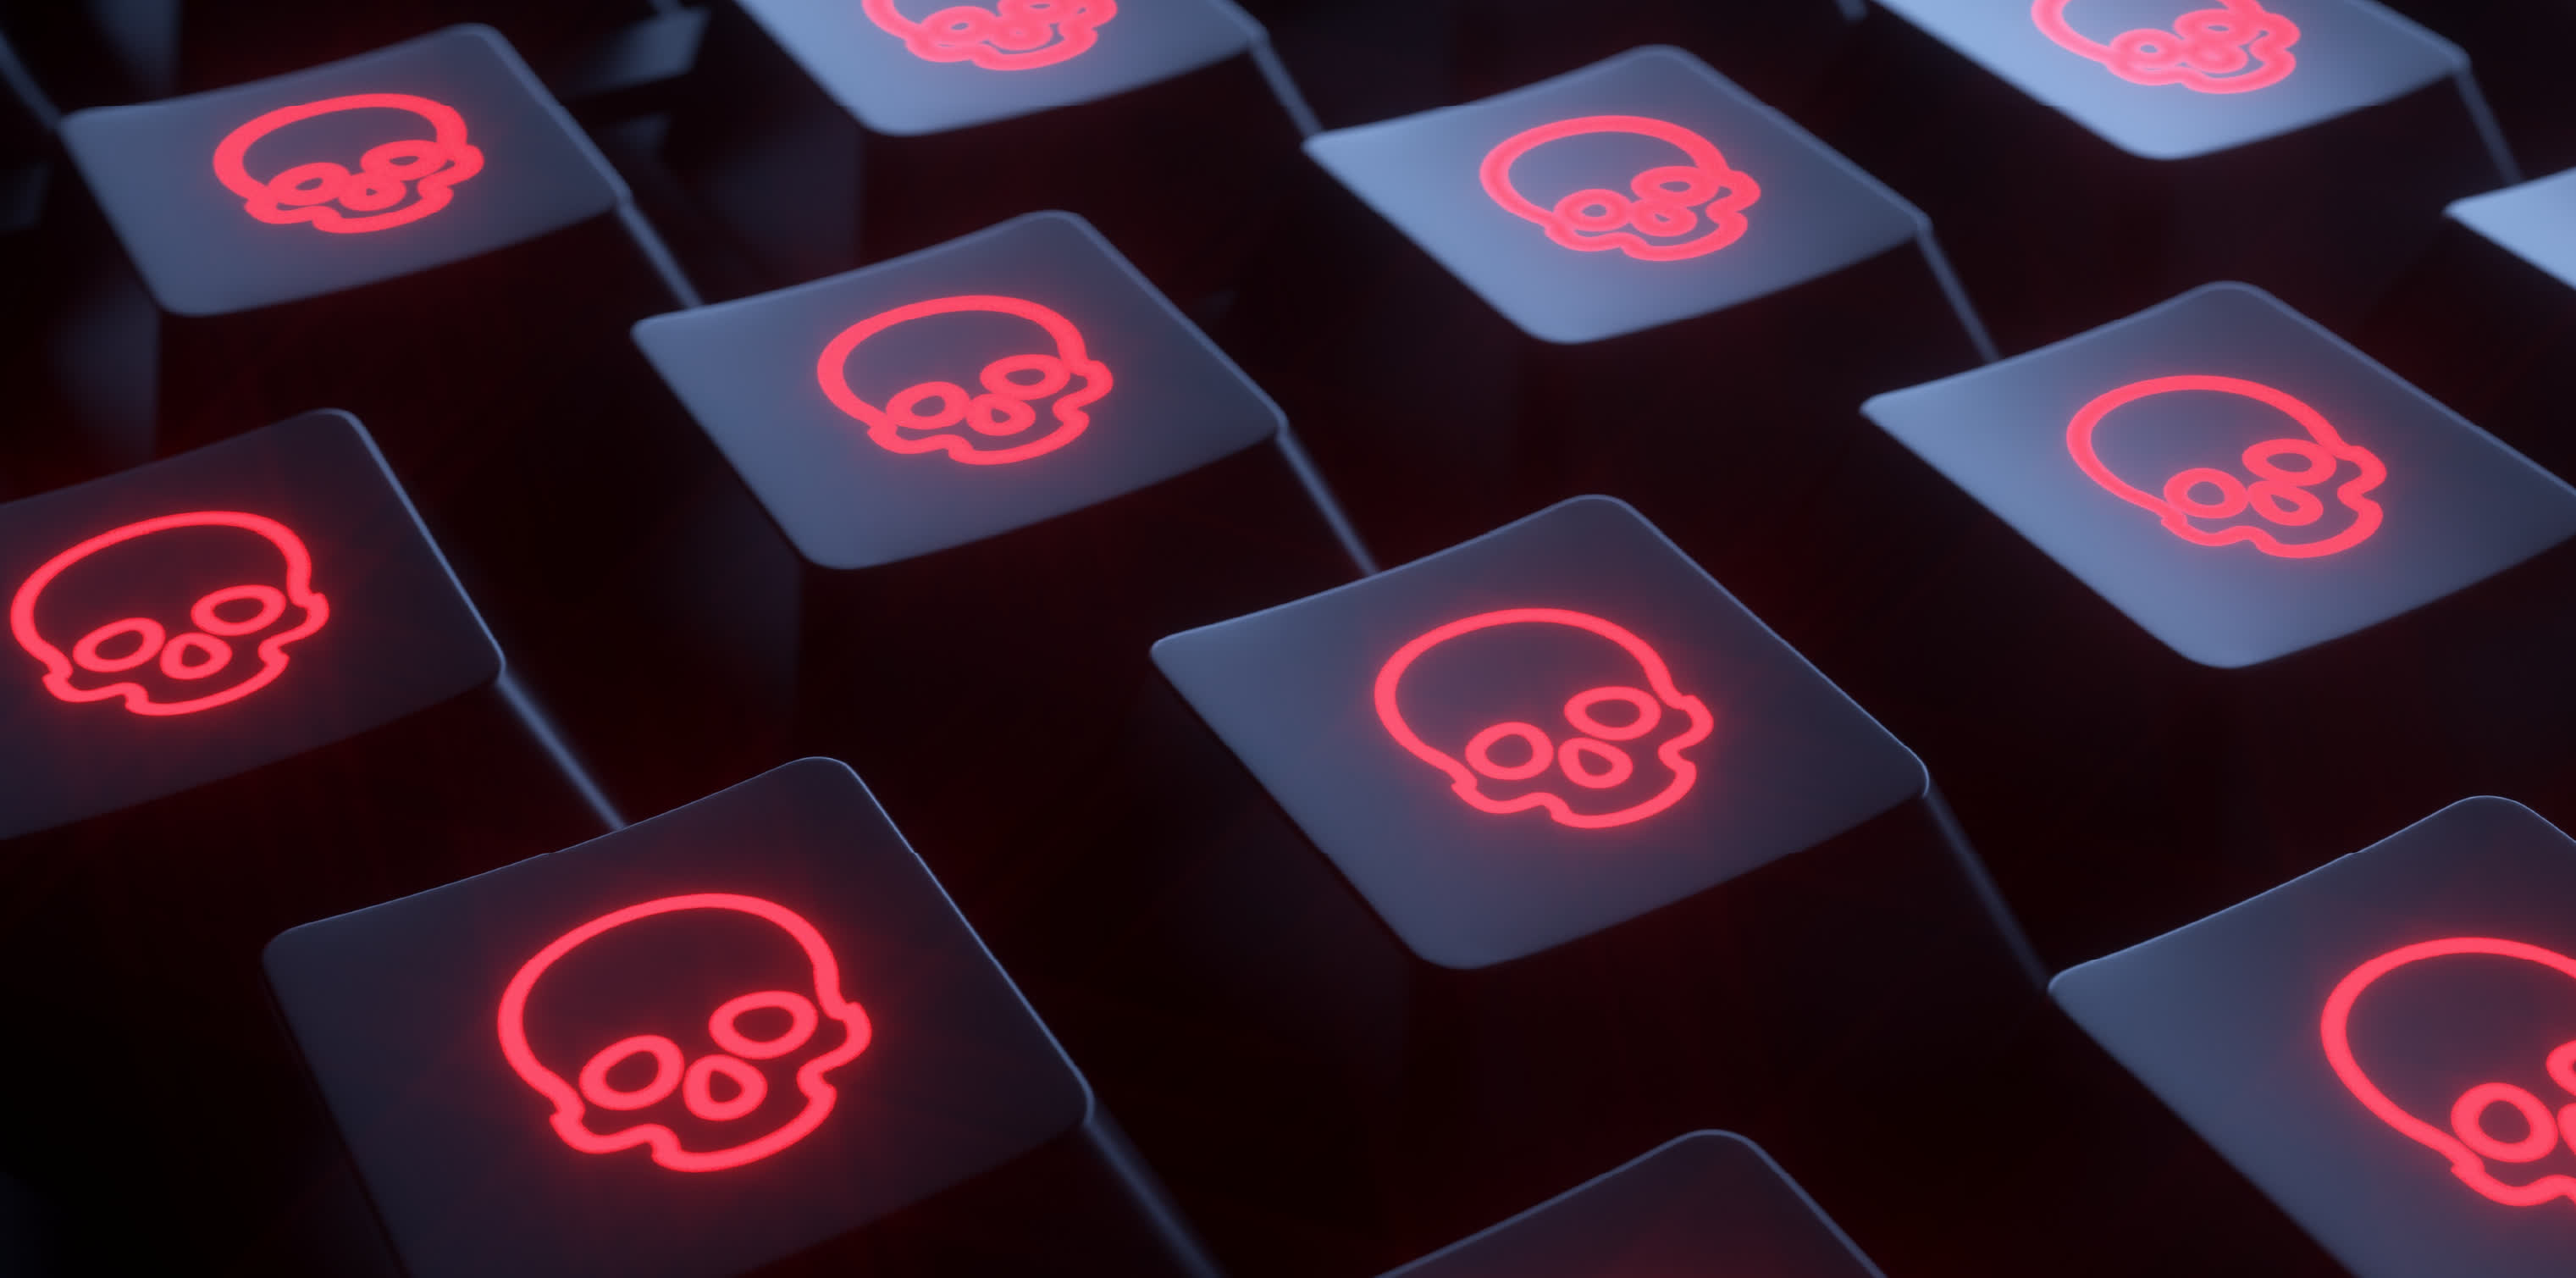 Kaspersky report highlights common ransomware attack patterns